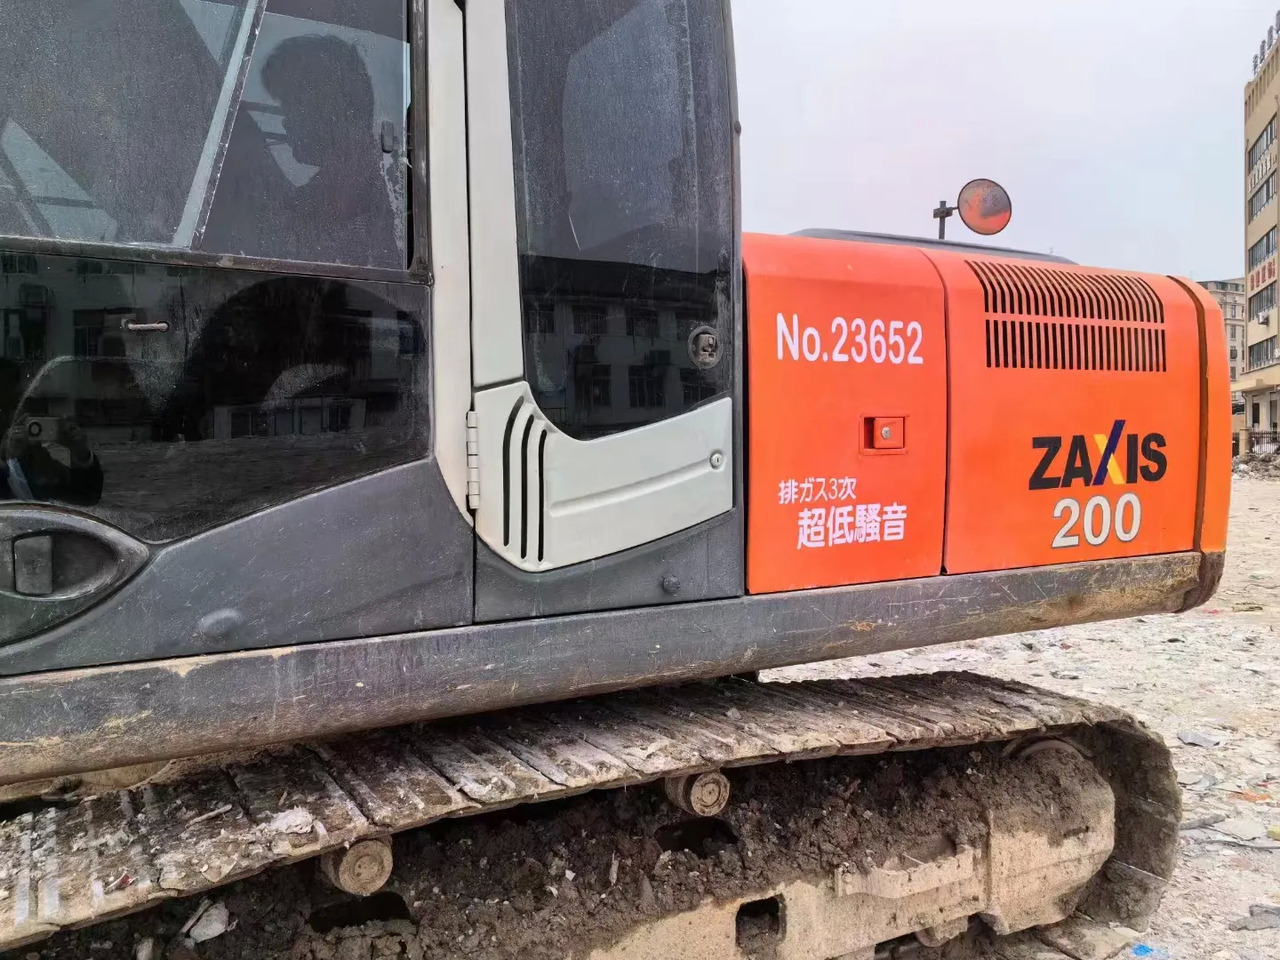 Crawler excavator Second hand hitachi zx200 excavator zx200-3g zx200-5g 20 ton used excavator in china yard for sale: picture 2